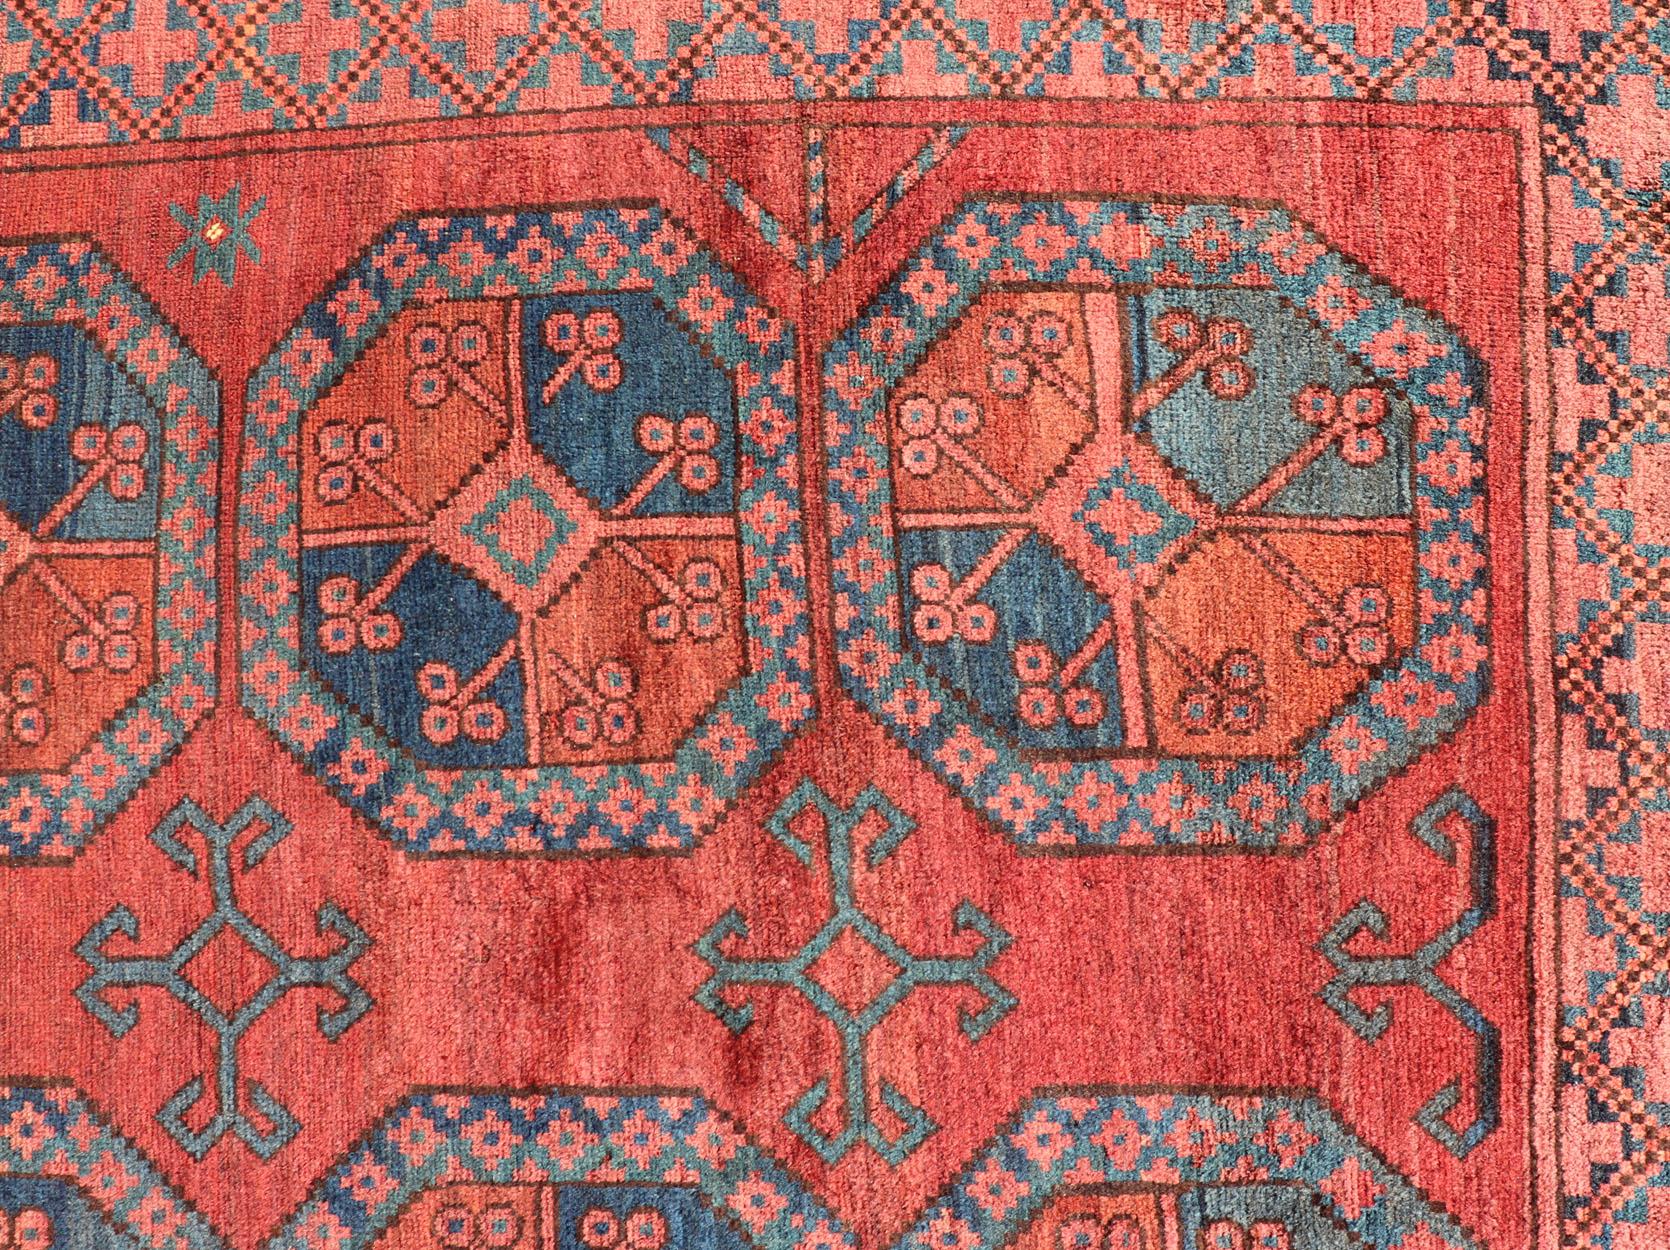 Hand-Knotted Turkomen Ersari Rug in Wool with Gul Design in Red, Orange and Blue For Sale 7